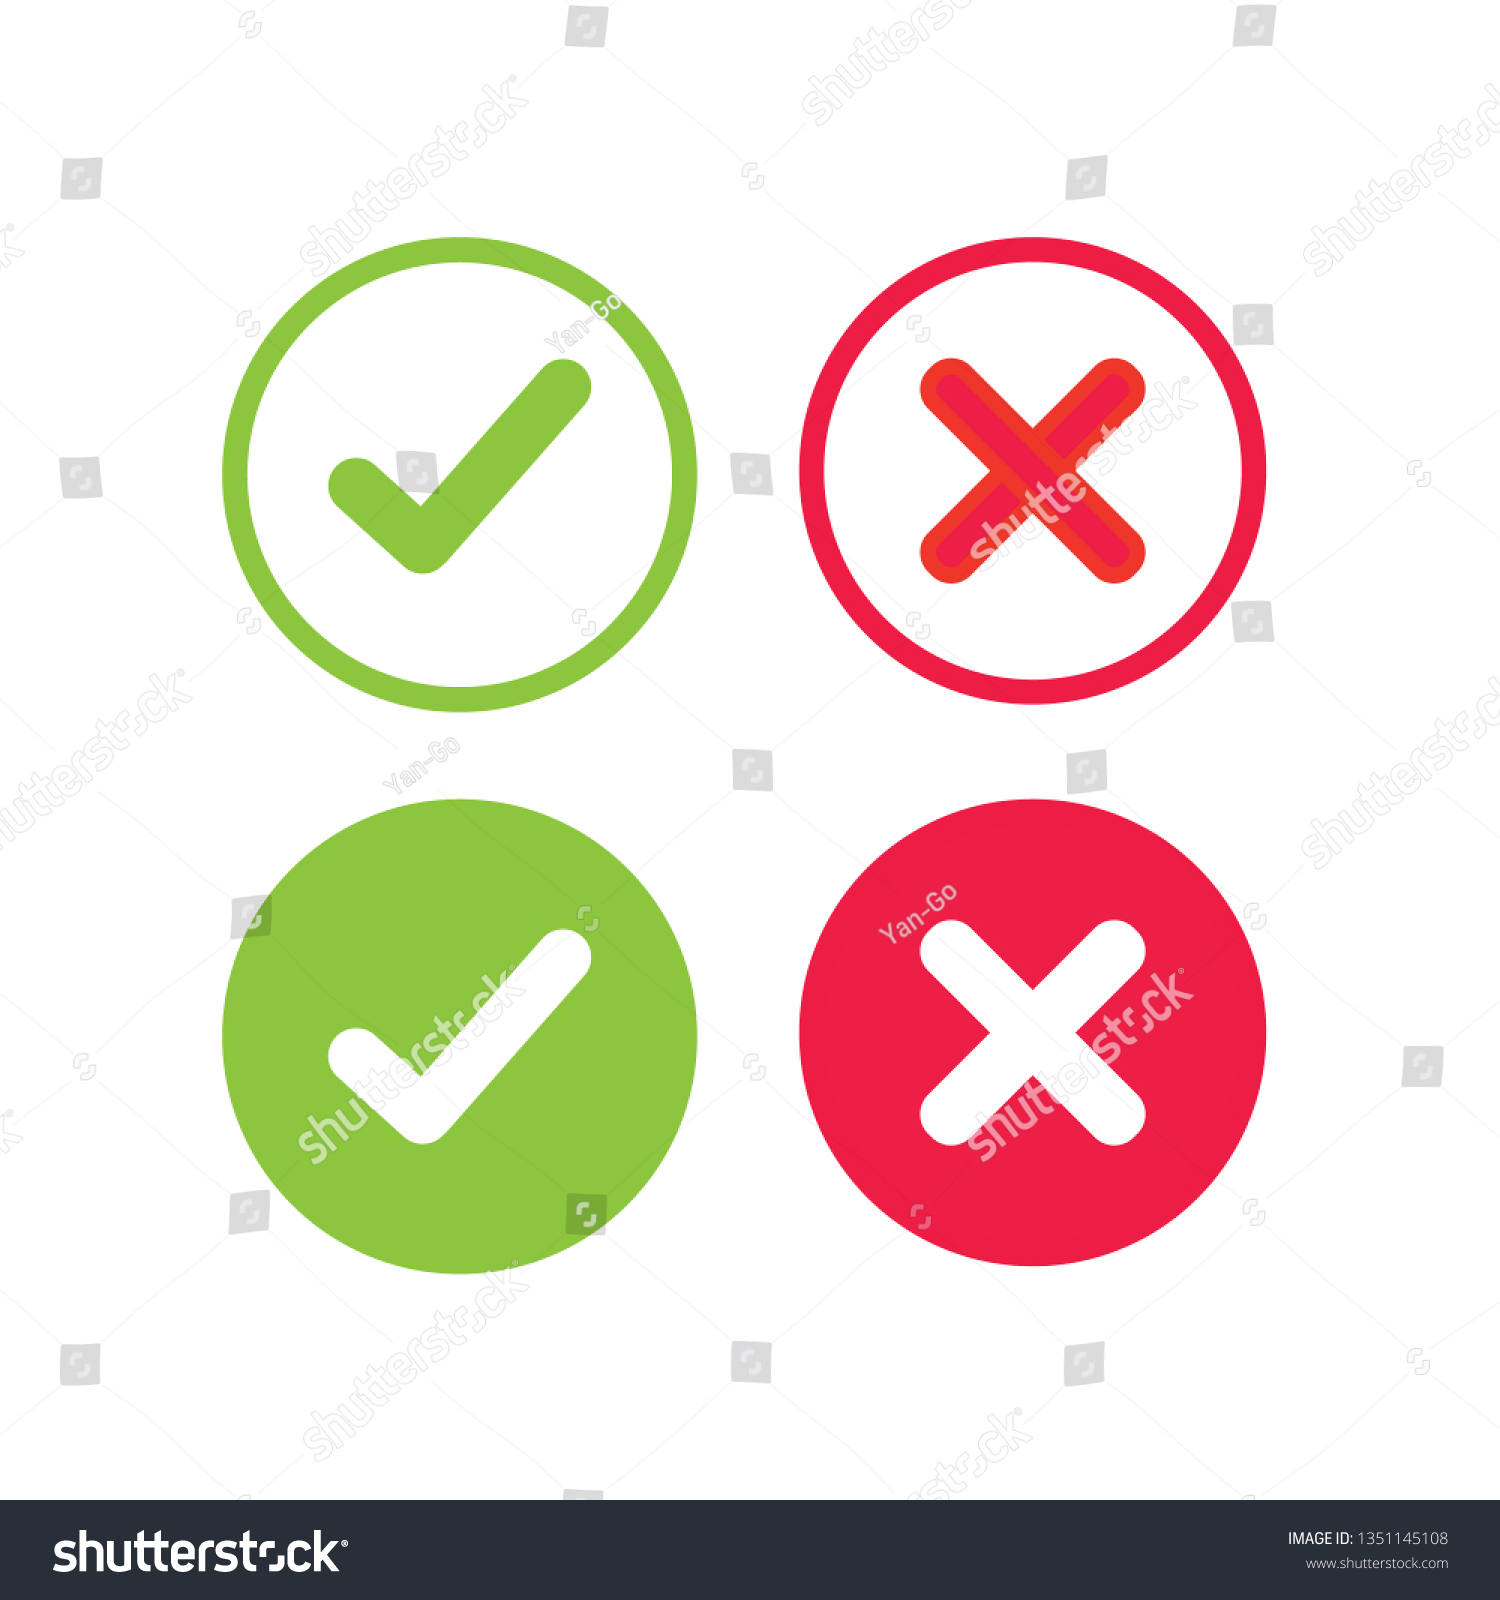 green check and red cross symbols, squared vector signs. Element of web icon for mobile concept and web apps- illustration
 #1351145108